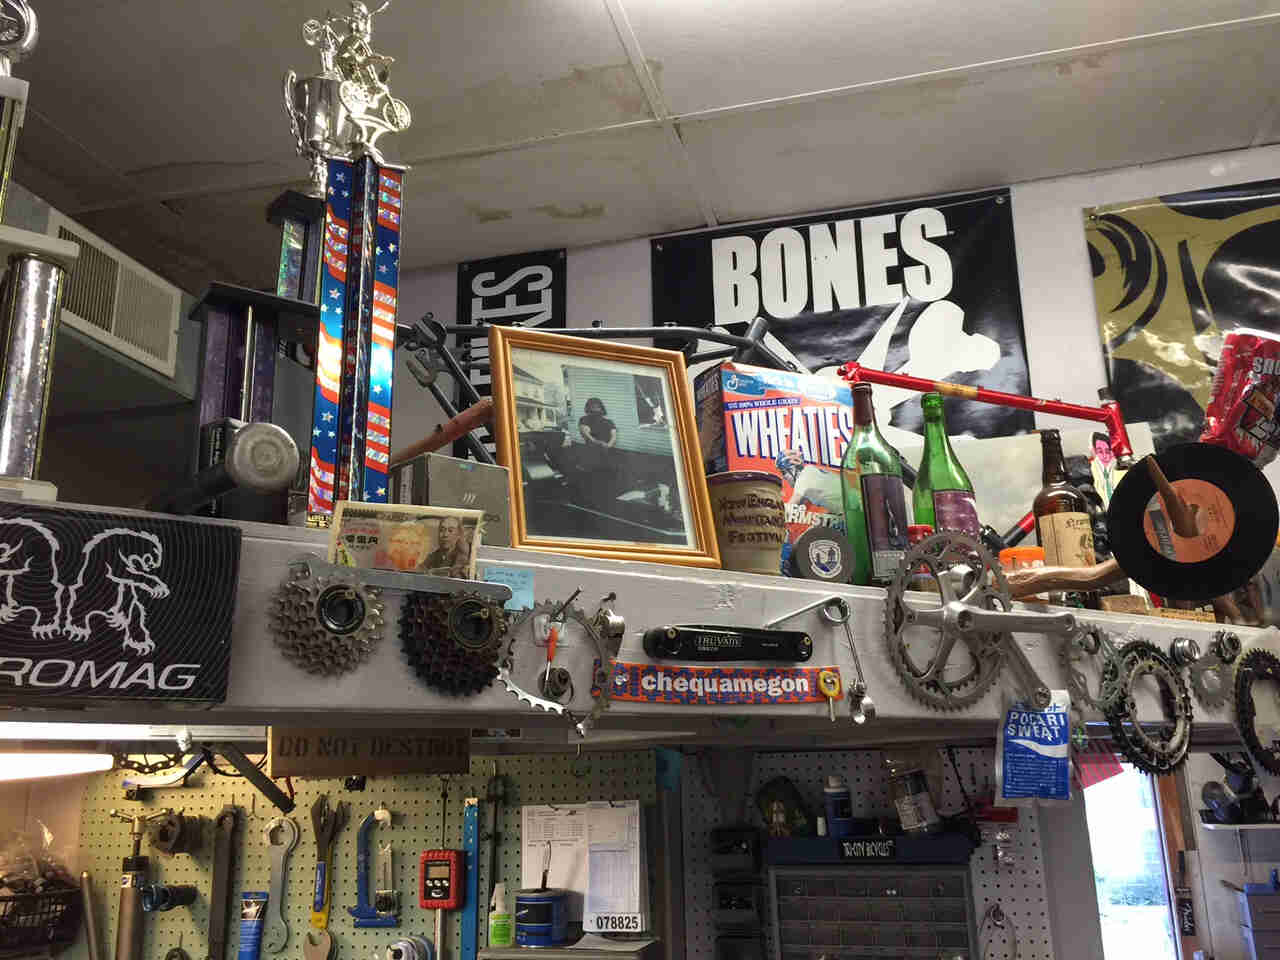 A collection of bike parts, posters and random items, on a shelf and mounted to walls